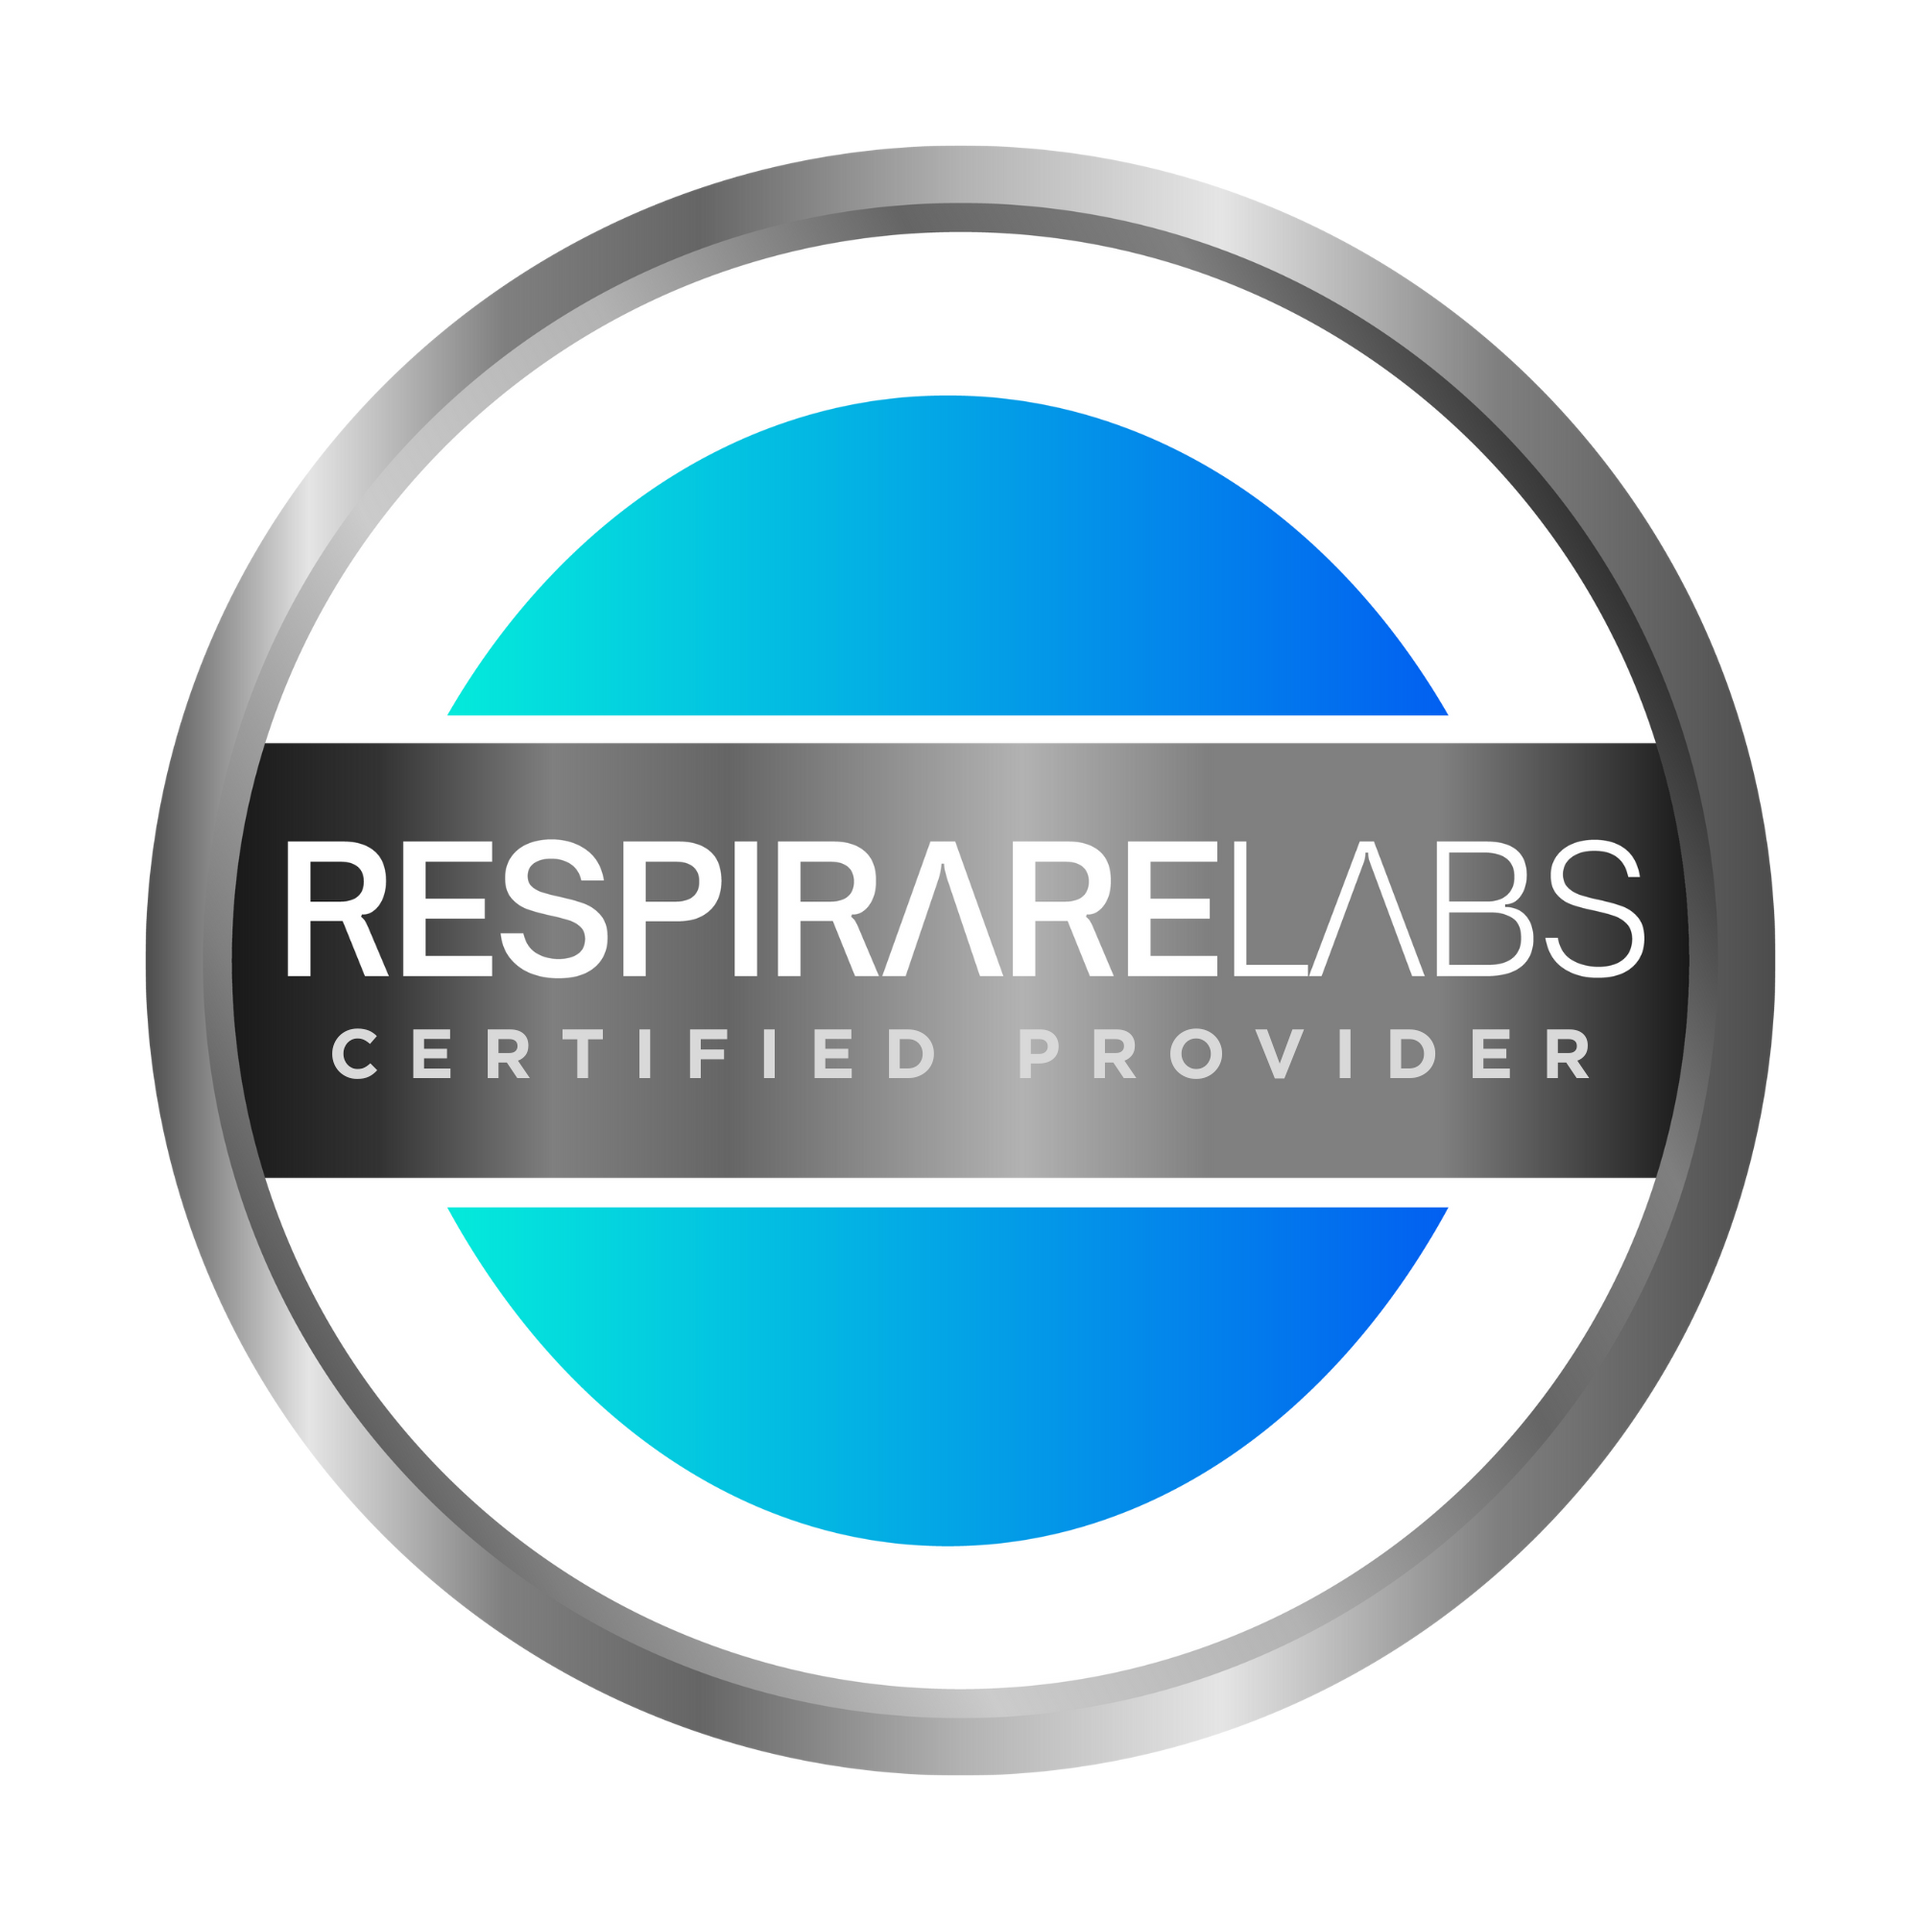 Respirare Labs Certified Provider seal